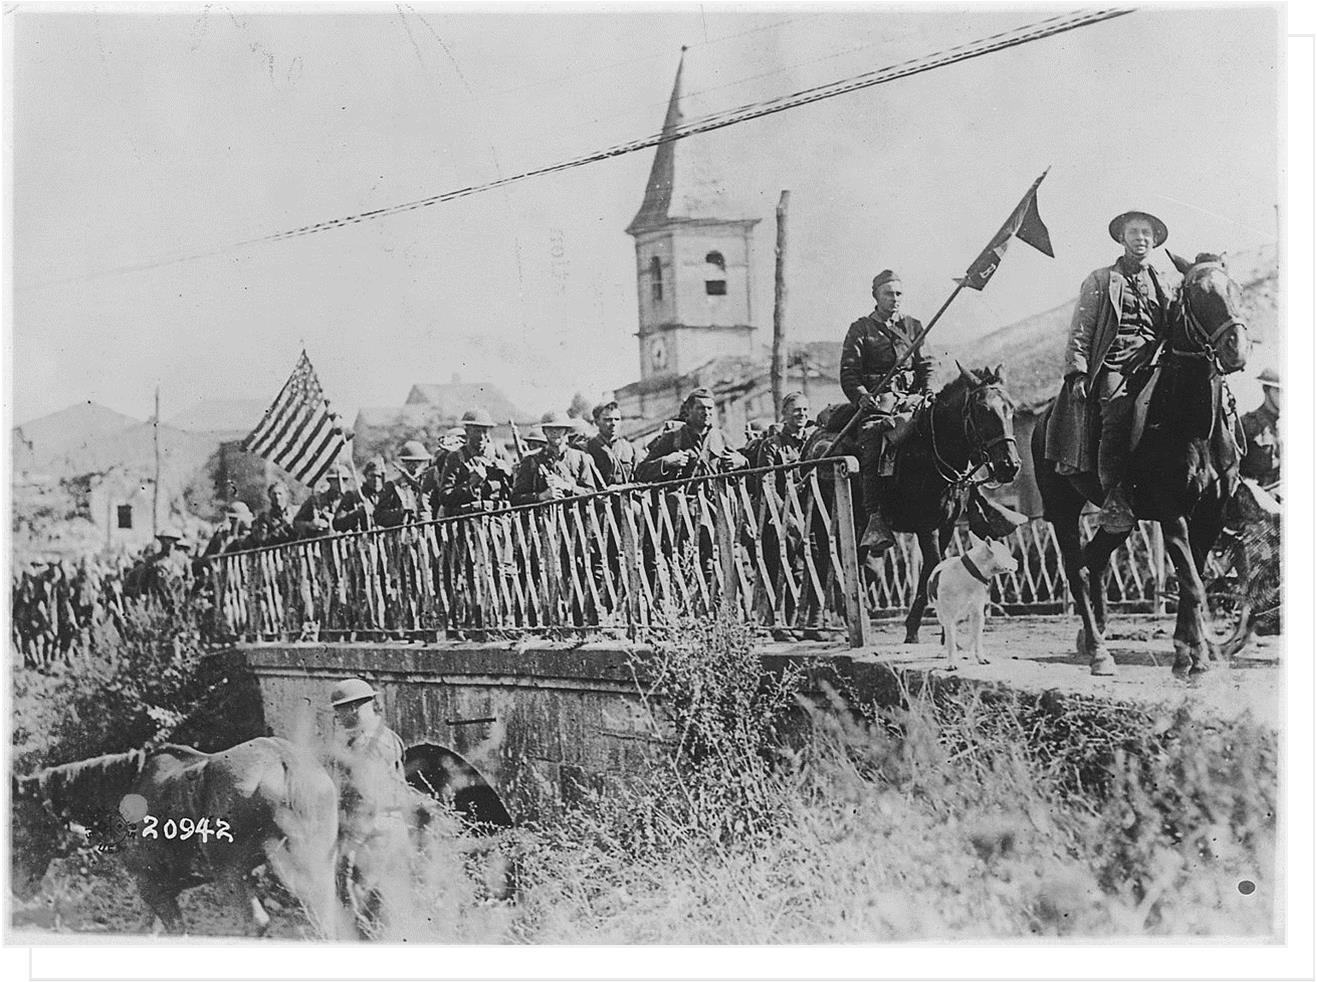 American Soldiers returning from the Battle of Saint-Mihiel 